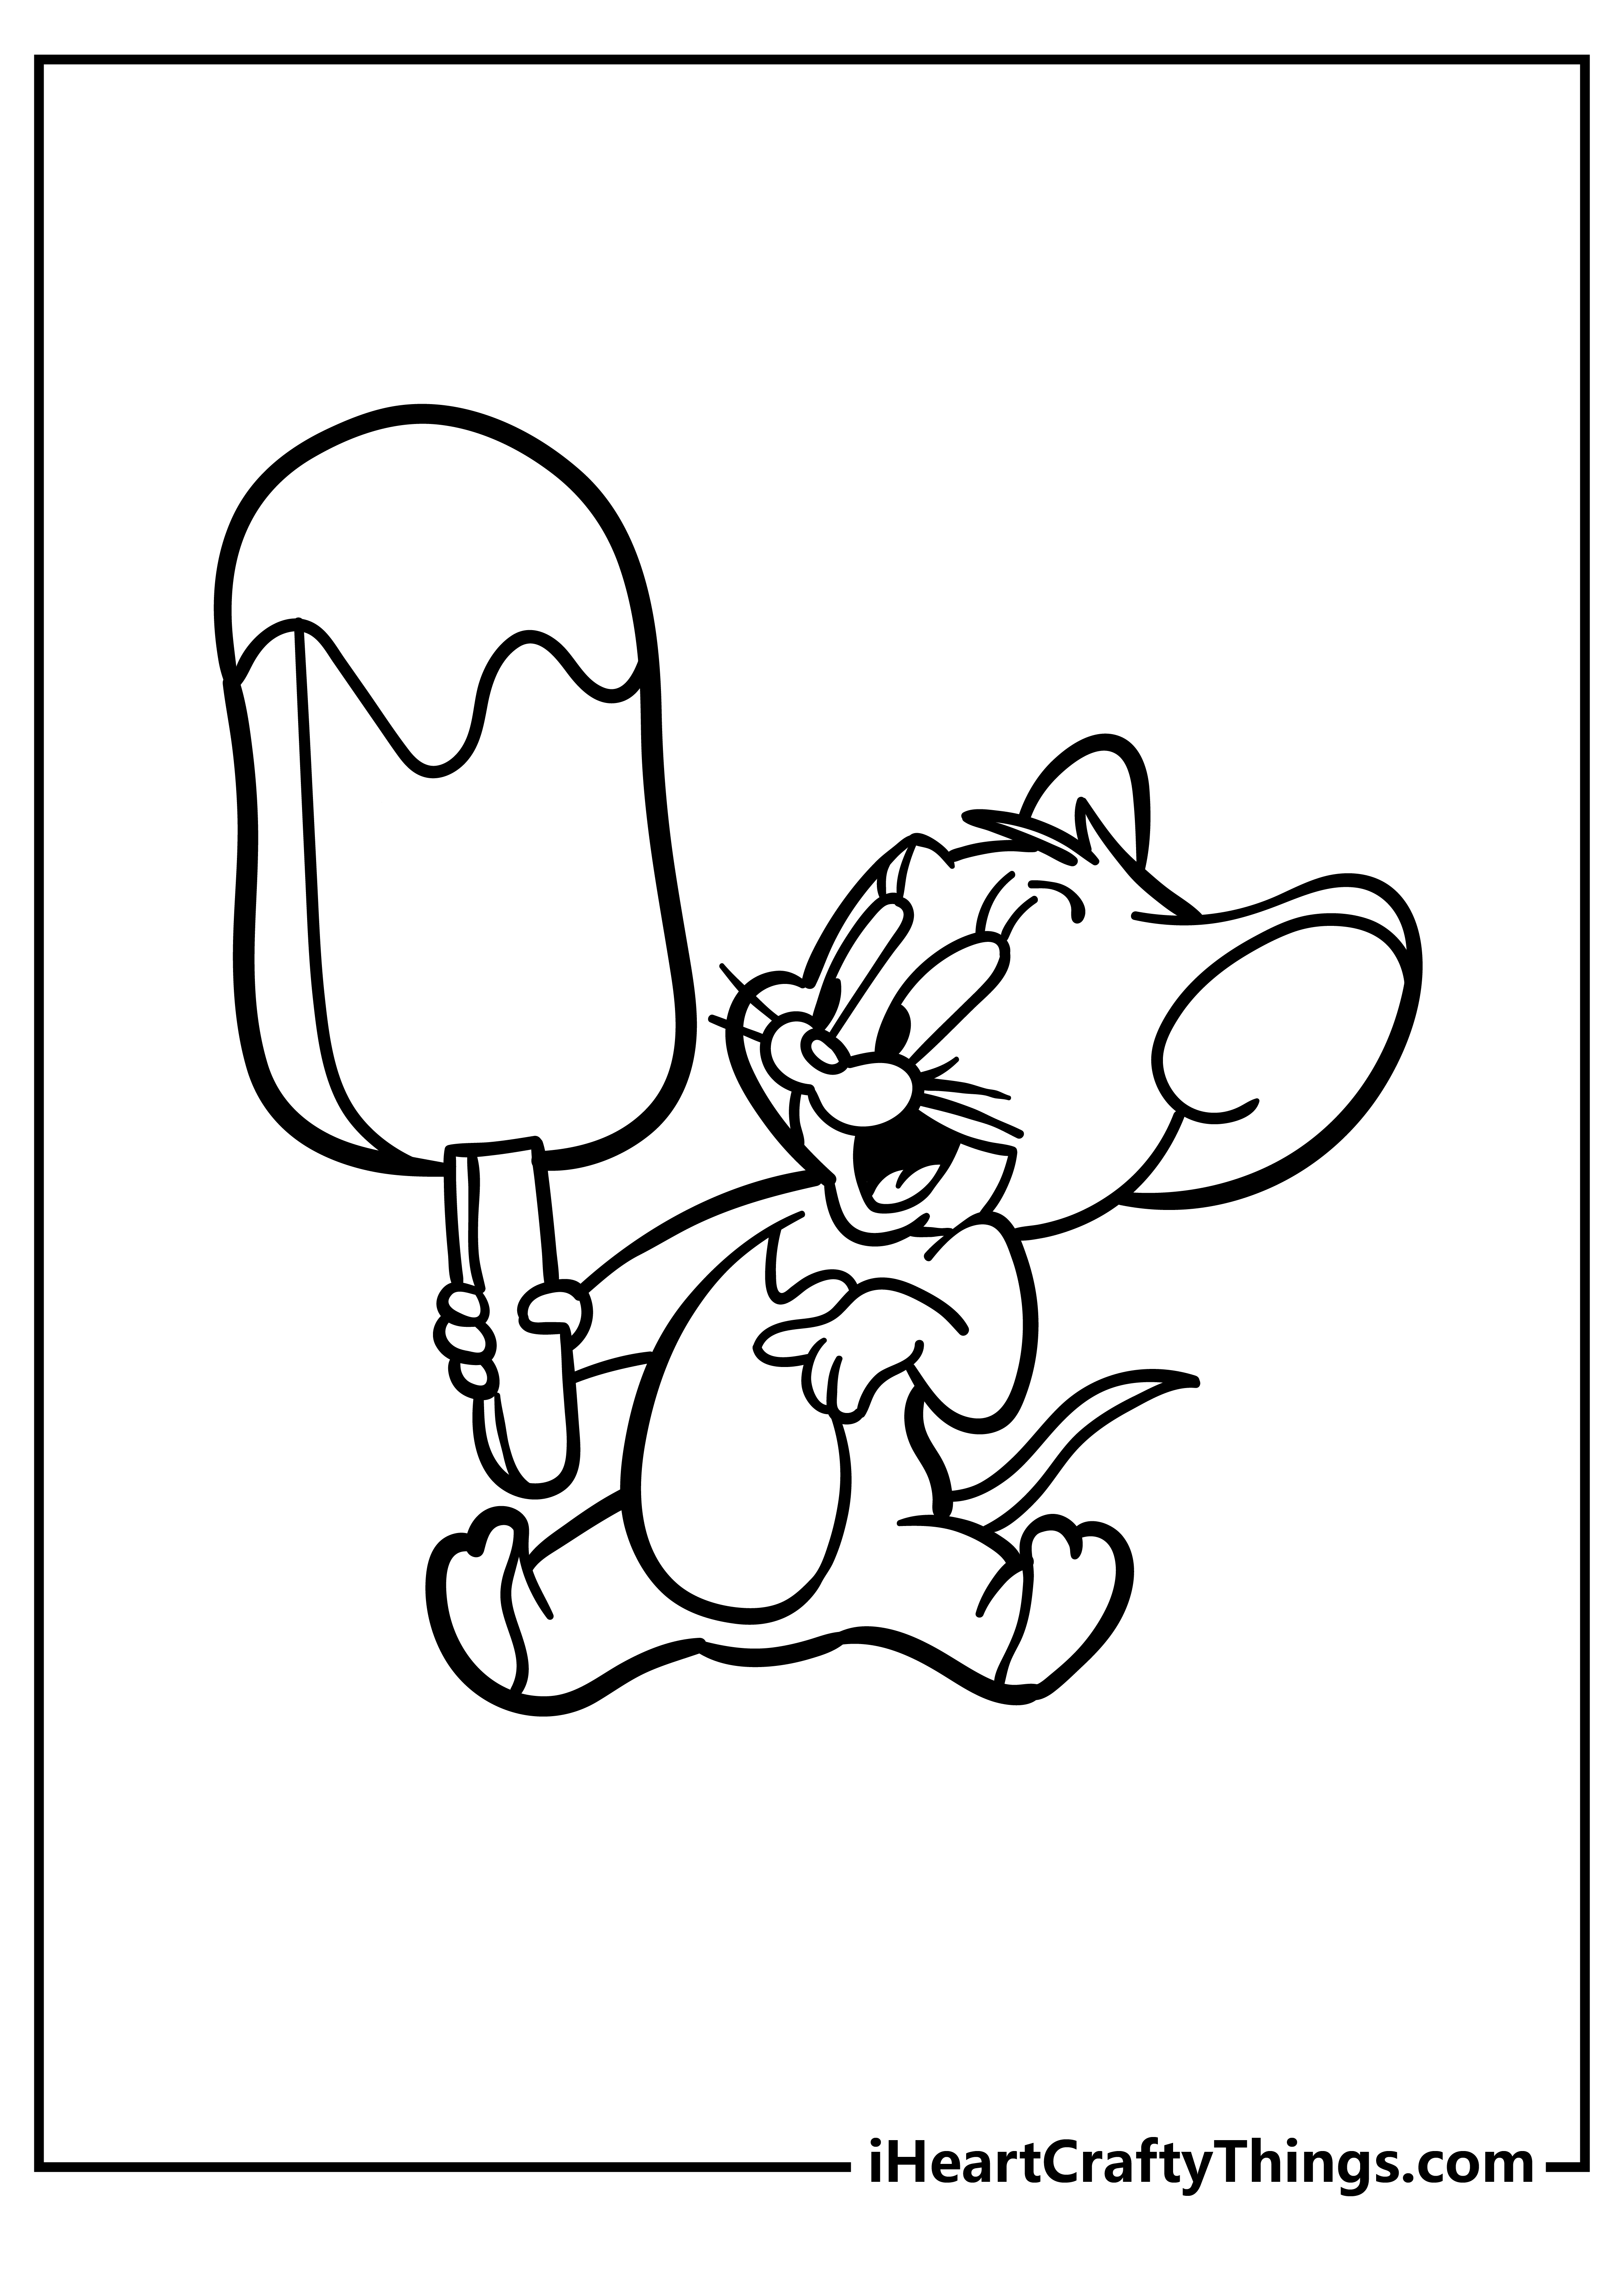 Tom and Jerry Coloring Pages for kids free download